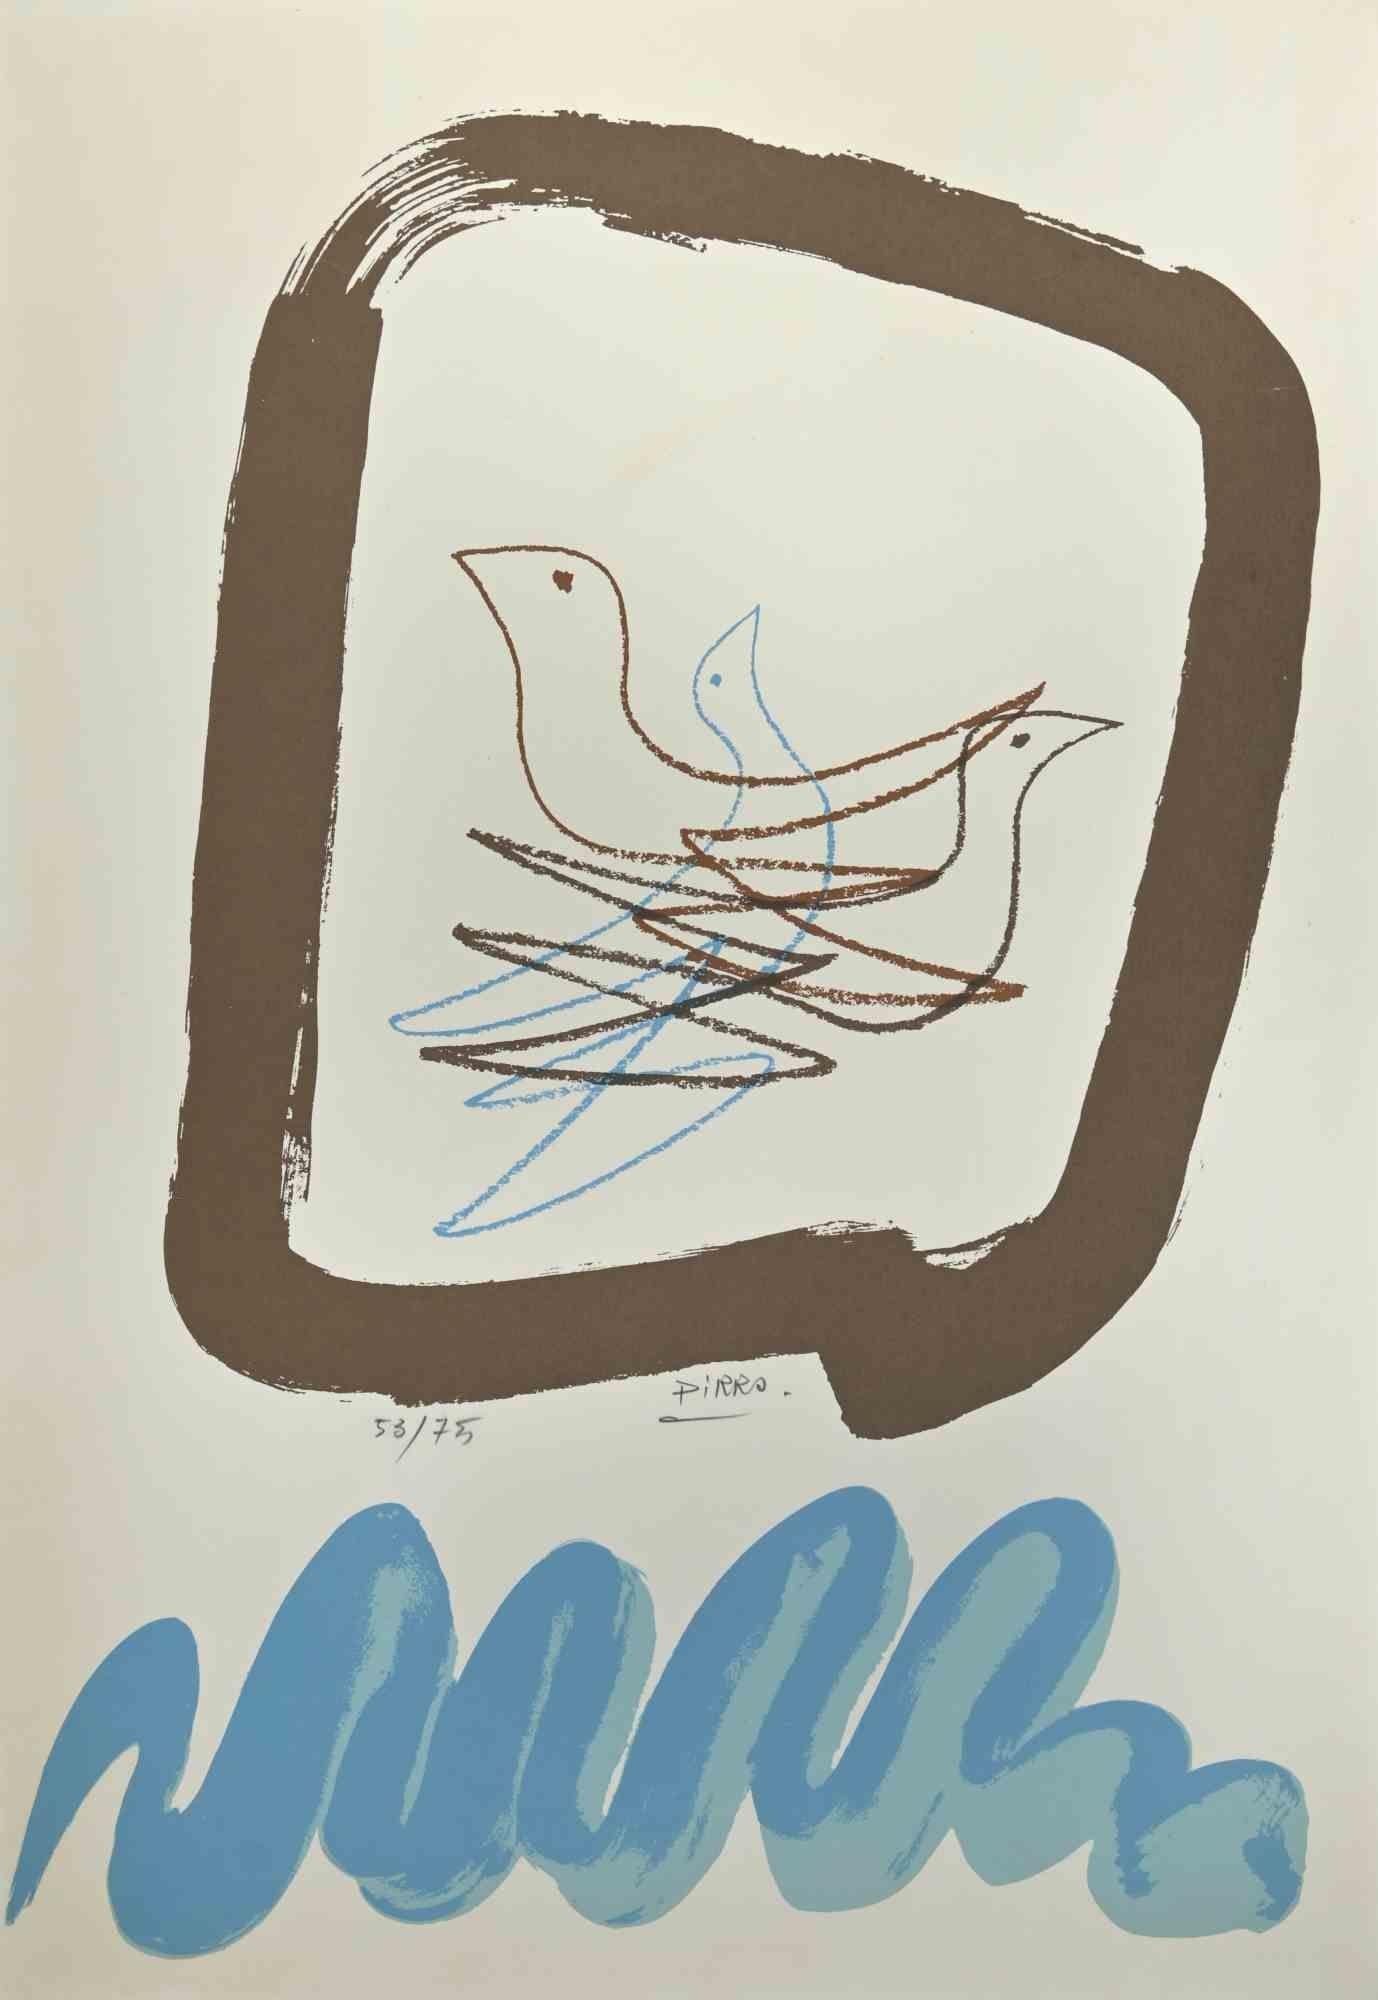 Lithographie - Oiseaux - Marcello Pirro - 1970